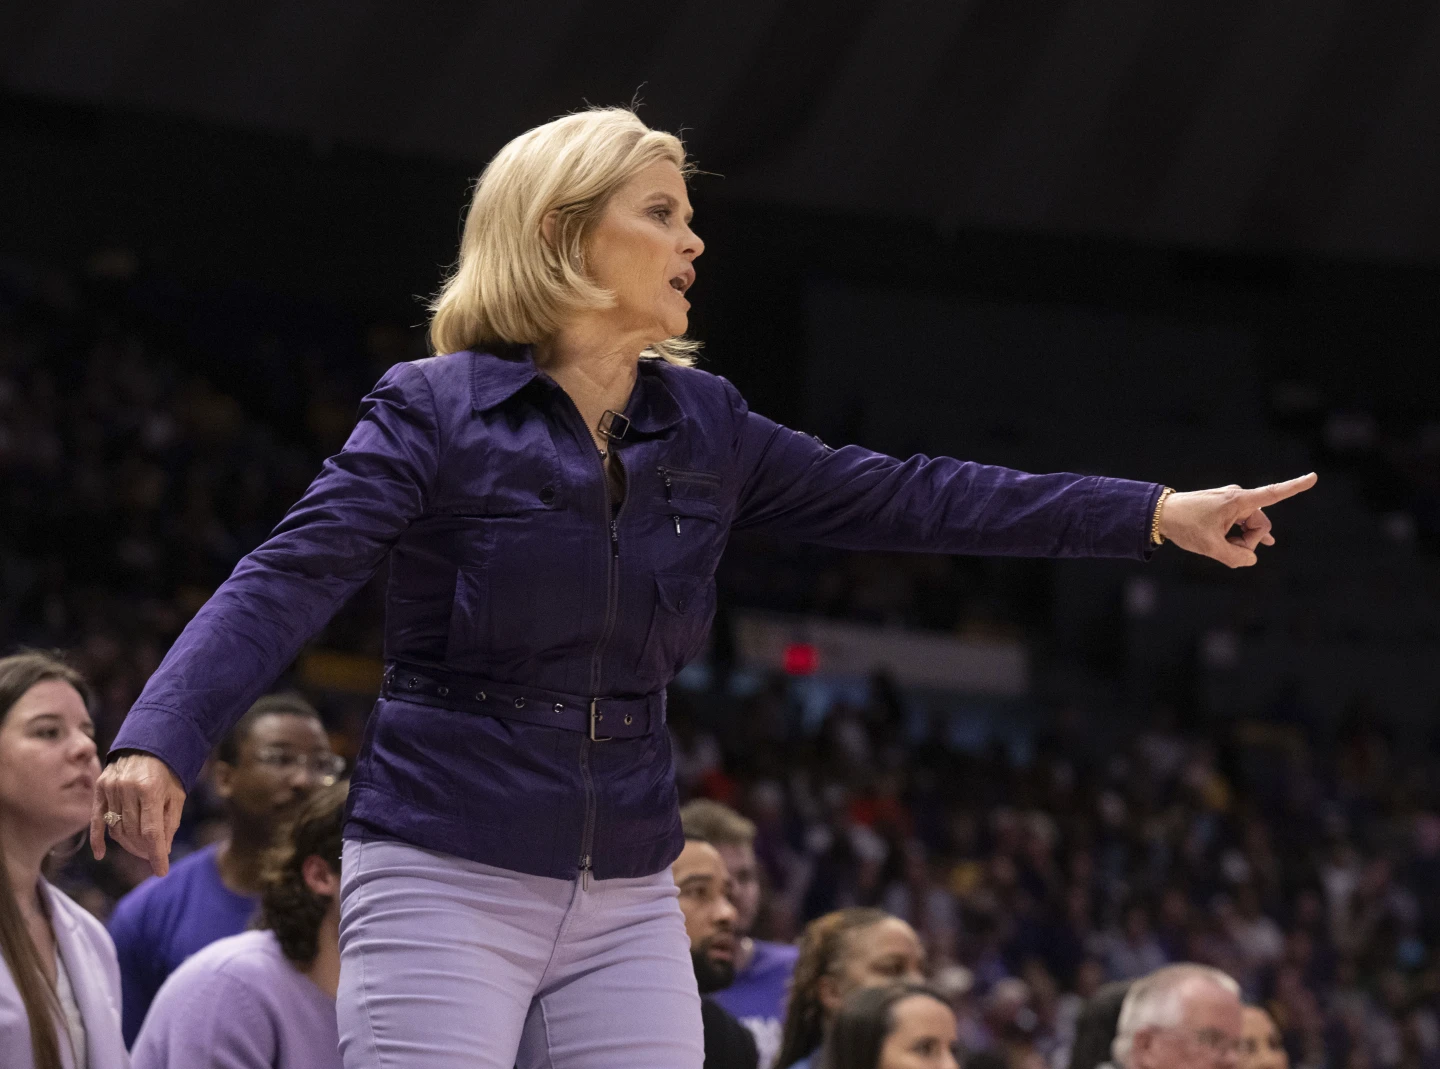 LSU's Kim Mulkey Faces Criticism After Controversial Comments Post-SEC Championship Brawl